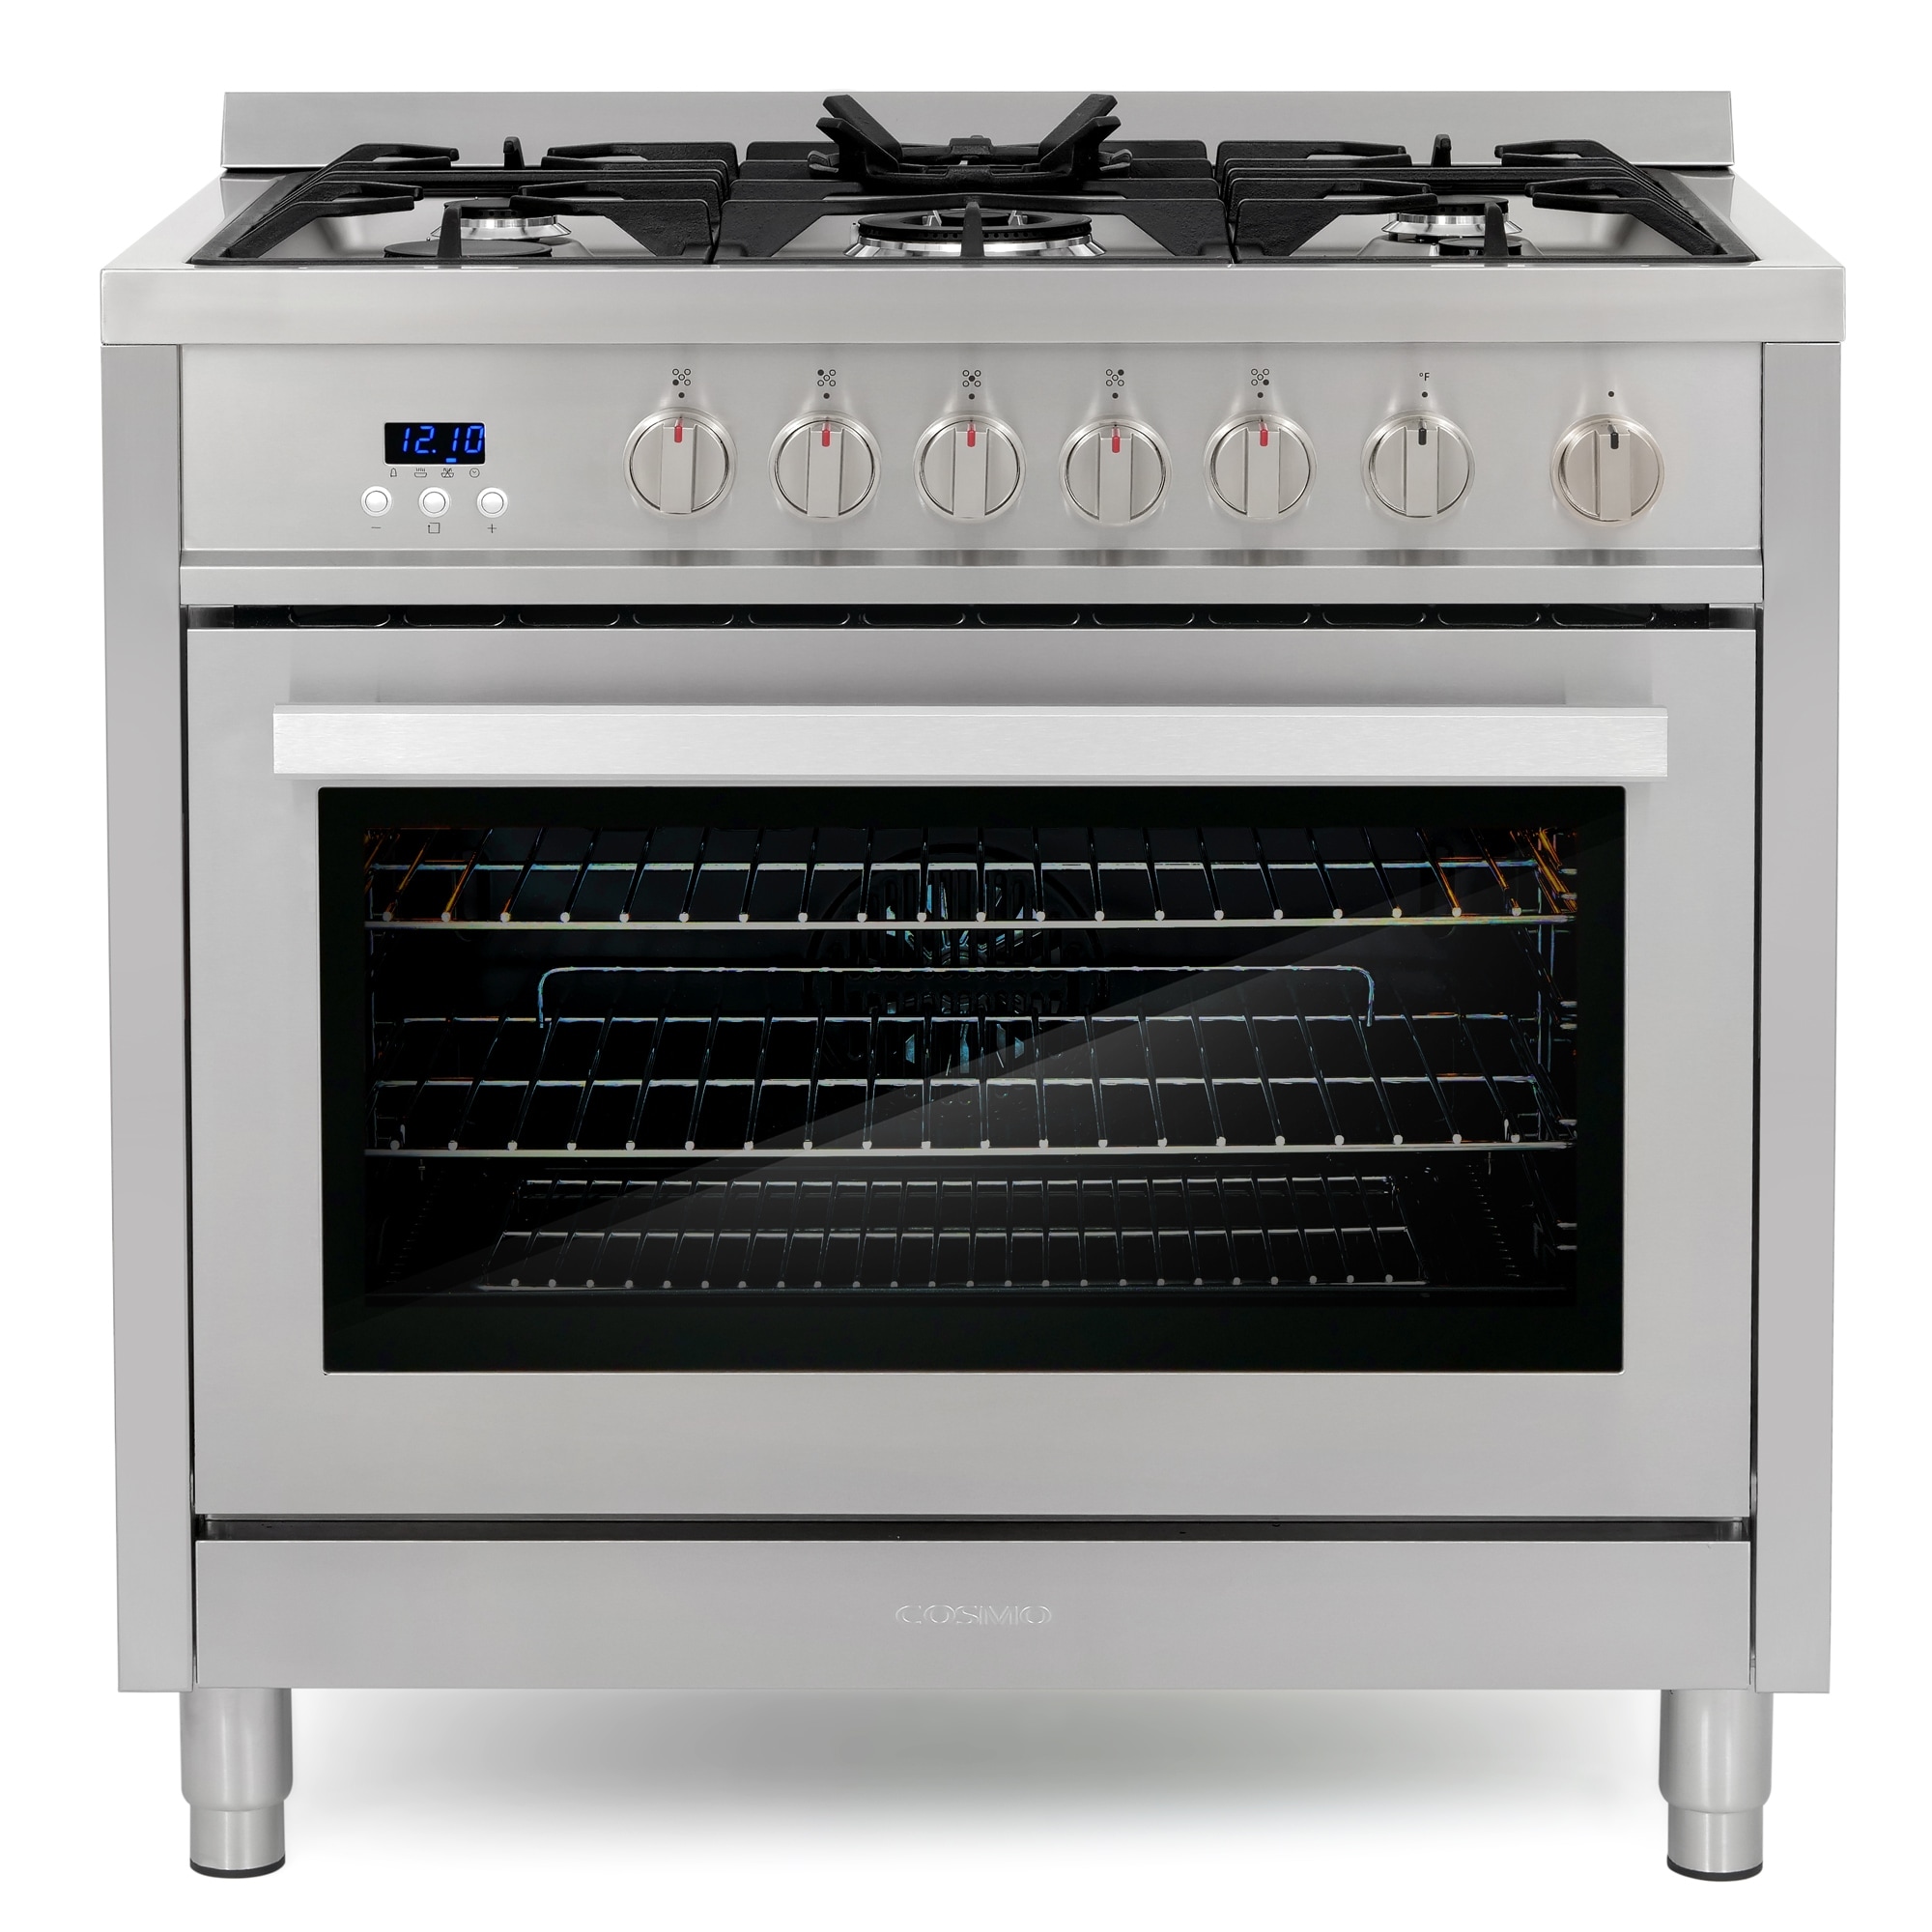 https://ak1.ostkcdn.com/images/products/is/images/direct/b1fed2177cc3e5ab67c5106fa0bcd2b4a72516a9/Cosmo-36-inch-Free-Standing-5-Burner-Convection-Gas-Range.jpg